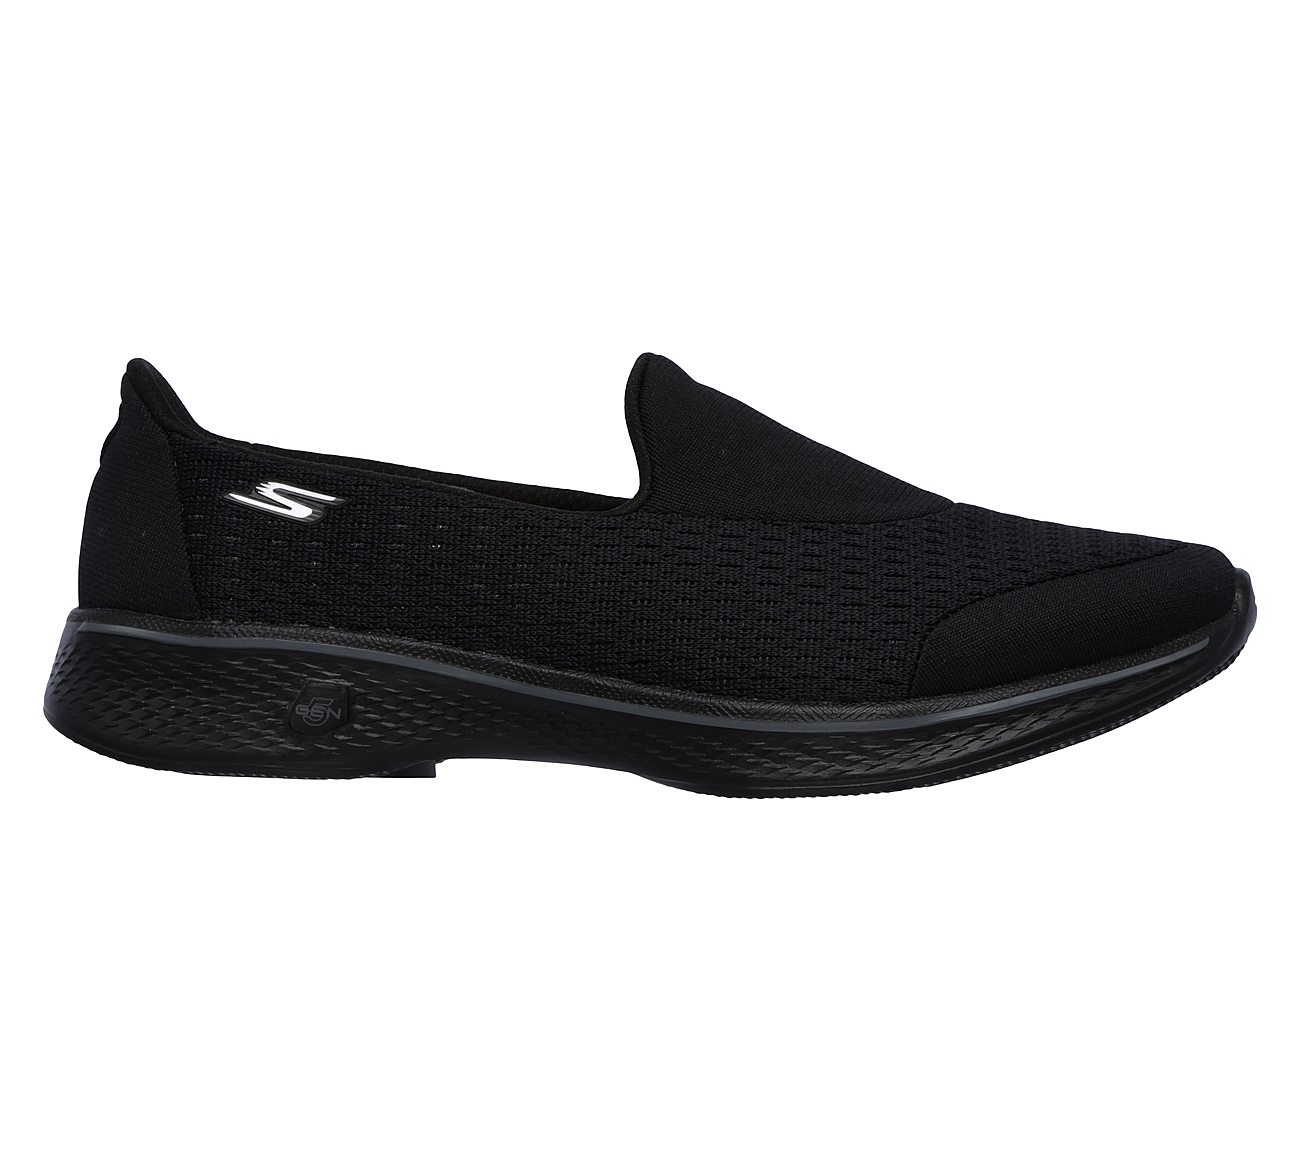 skechers shoes price in nepal